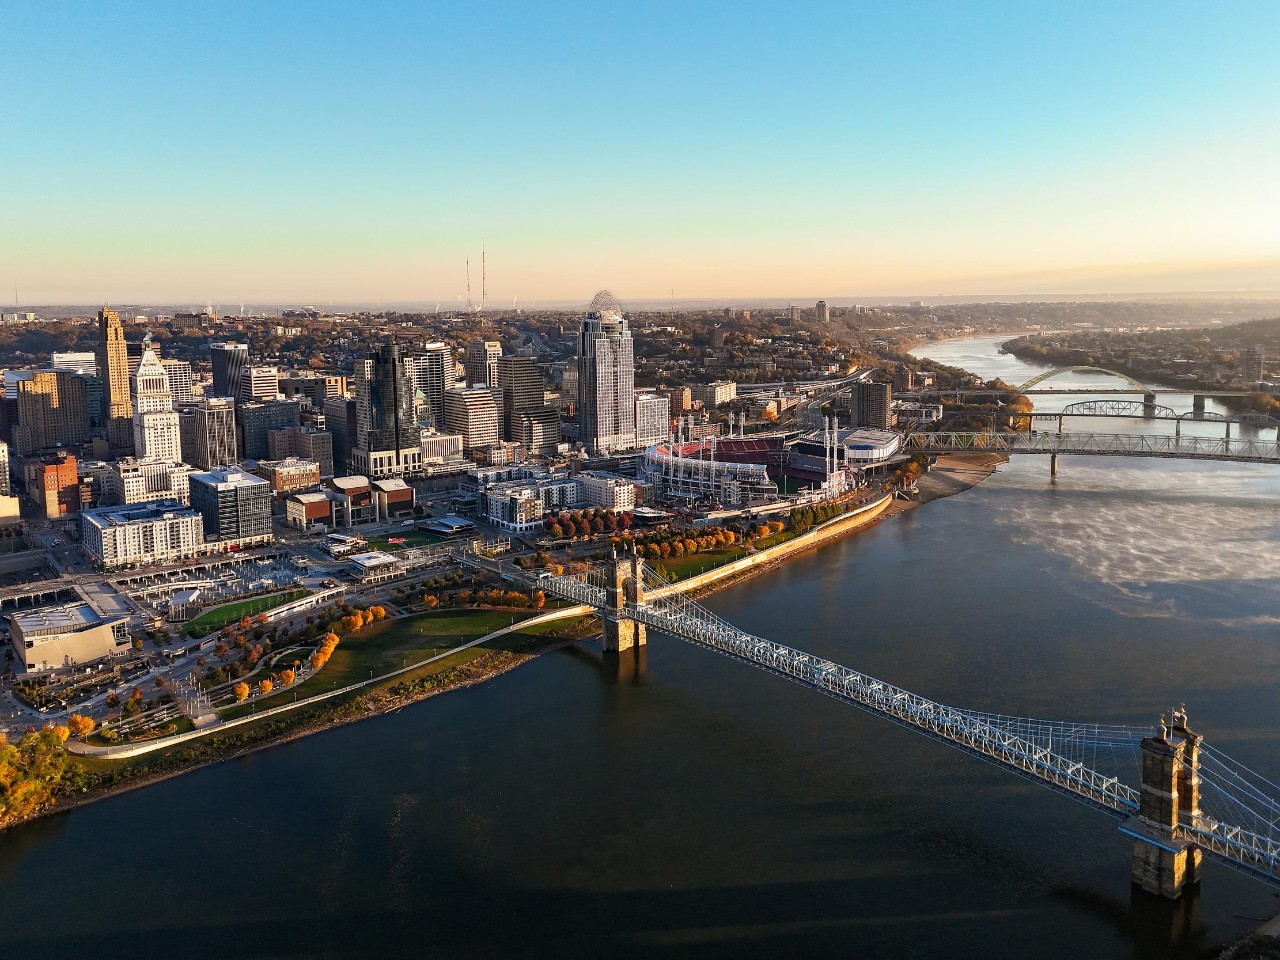 An aerial view of the Ohio River shows the Cincinnati skyline and its bridges.